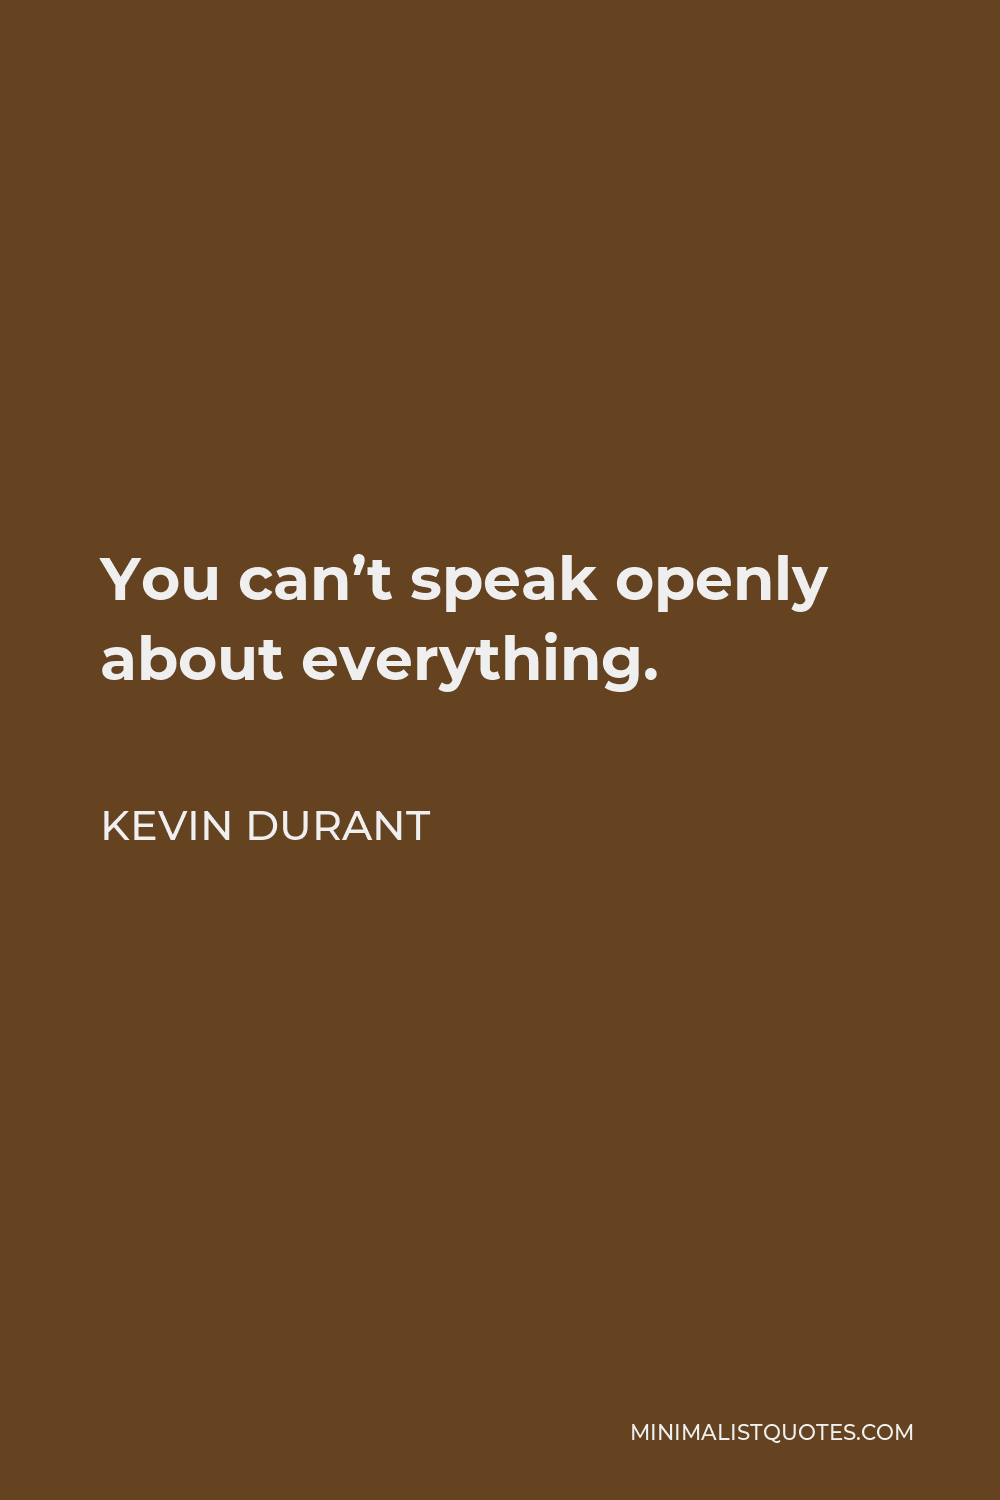 Kevin Durant Quote - You can’t speak openly about everything.